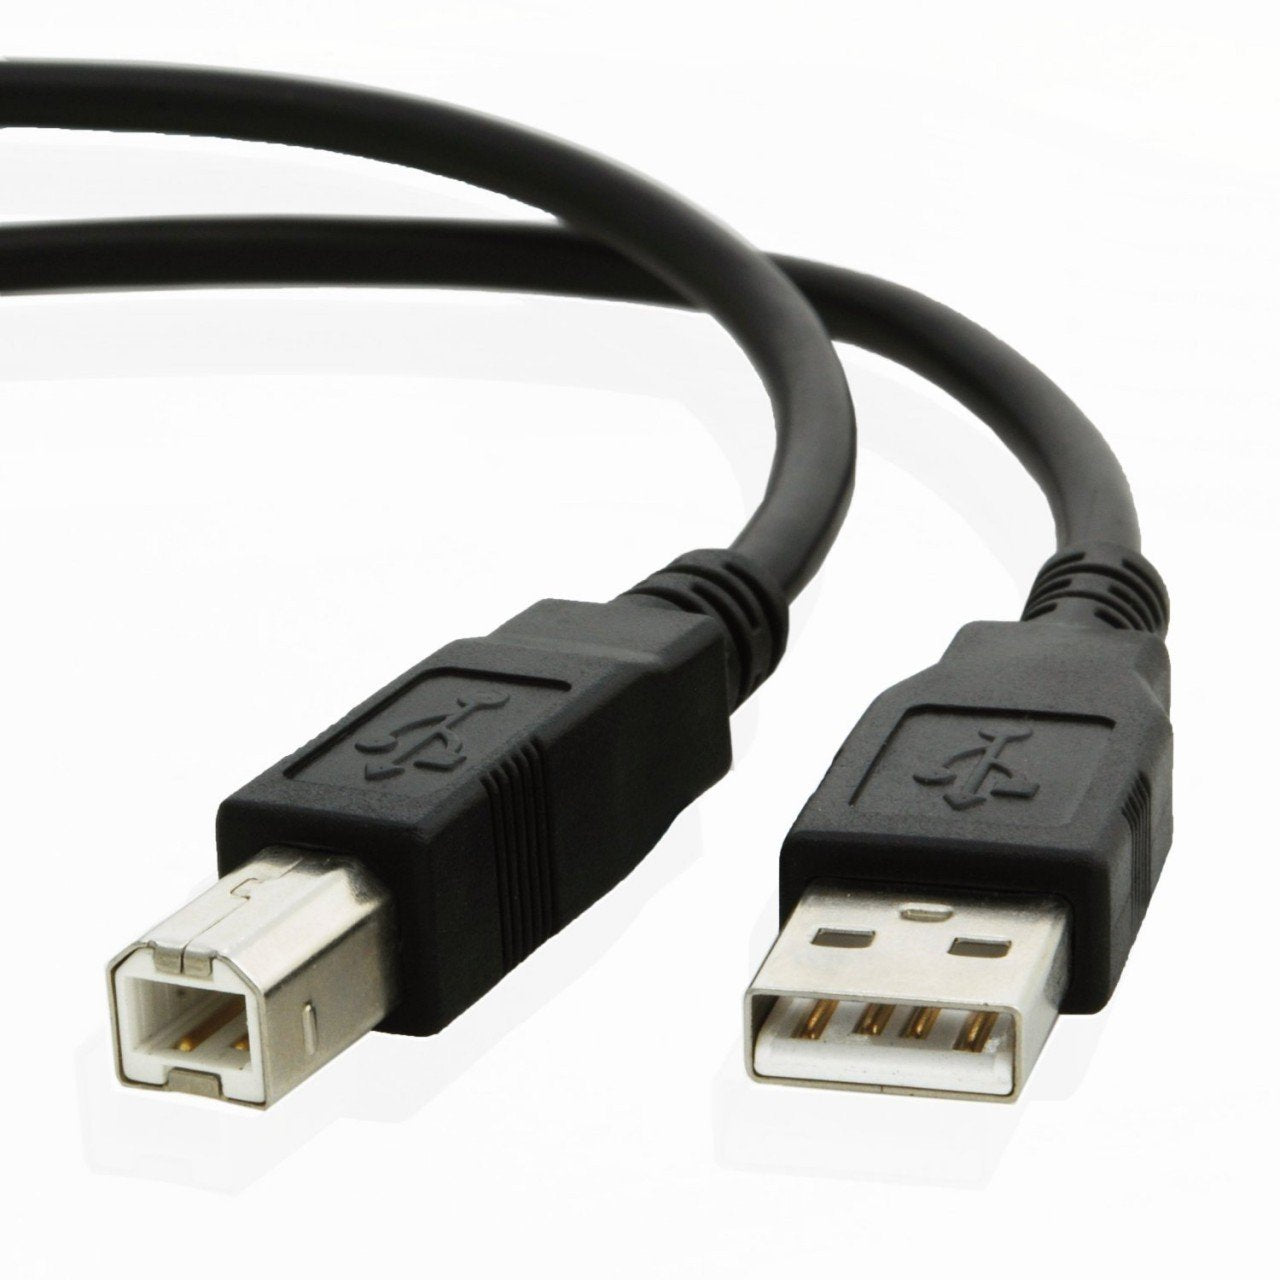 USB cable for Hp LASERJET PRO M452nw